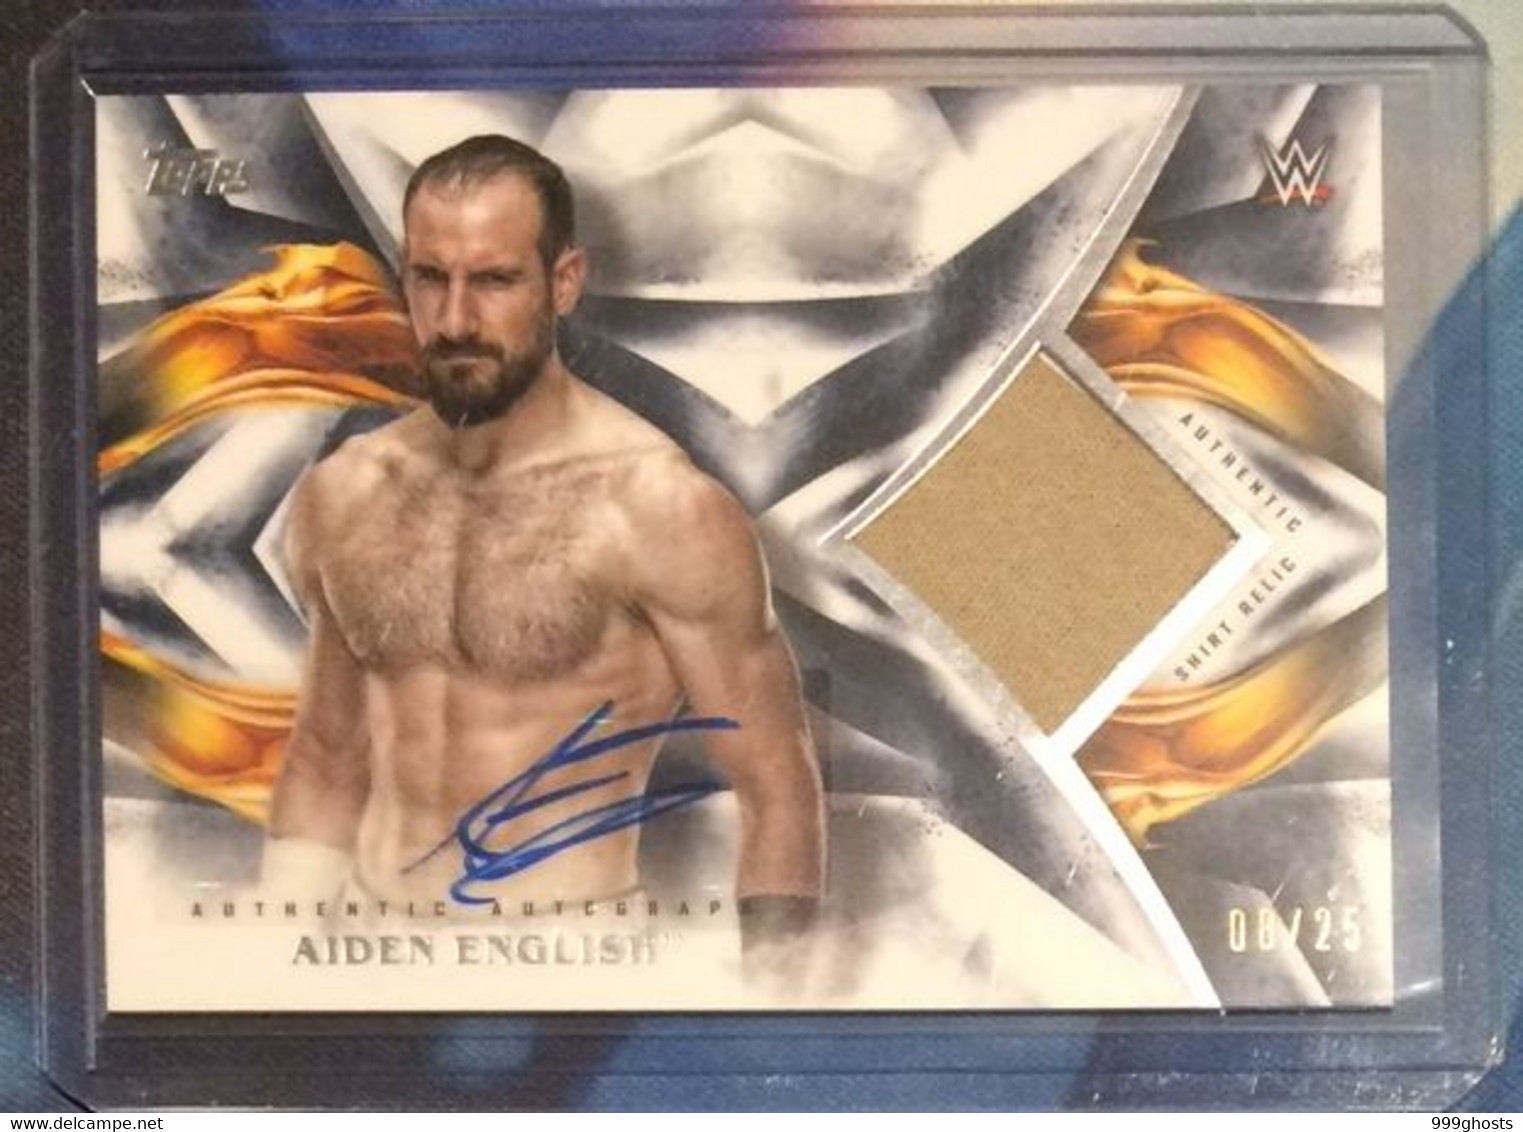 2019 TOPPS Undisputed 08/25 AIDEN ENGLISH Autograph Relic Signed Trading Card WWE Wrestling - Trading-Karten